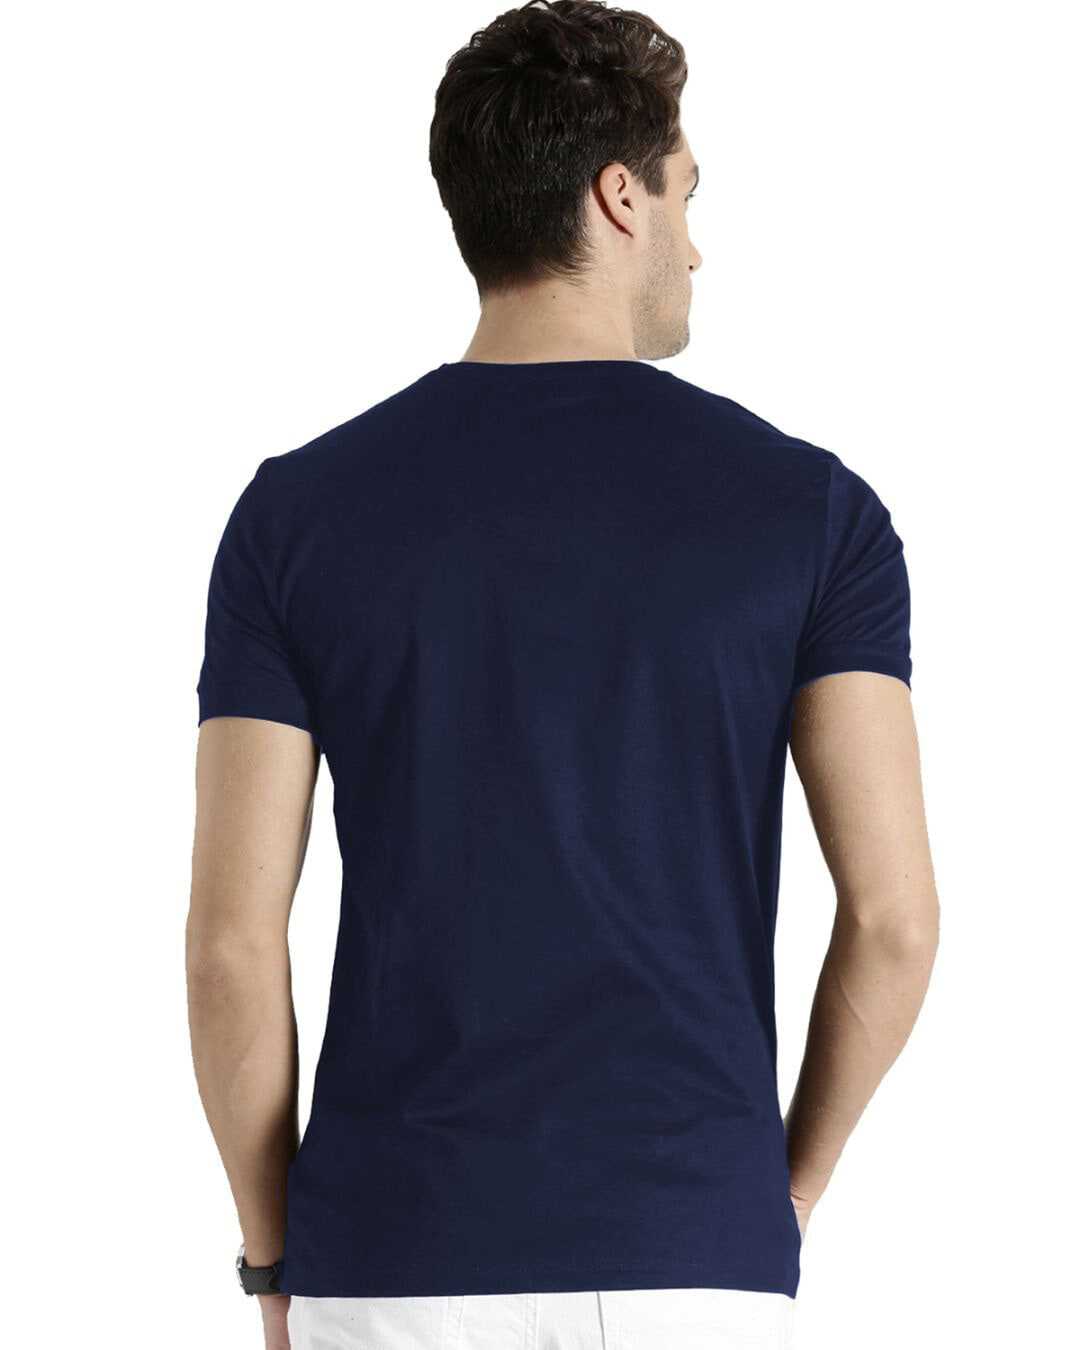 Shop Graphic Printed T-shirt for Men's-Back